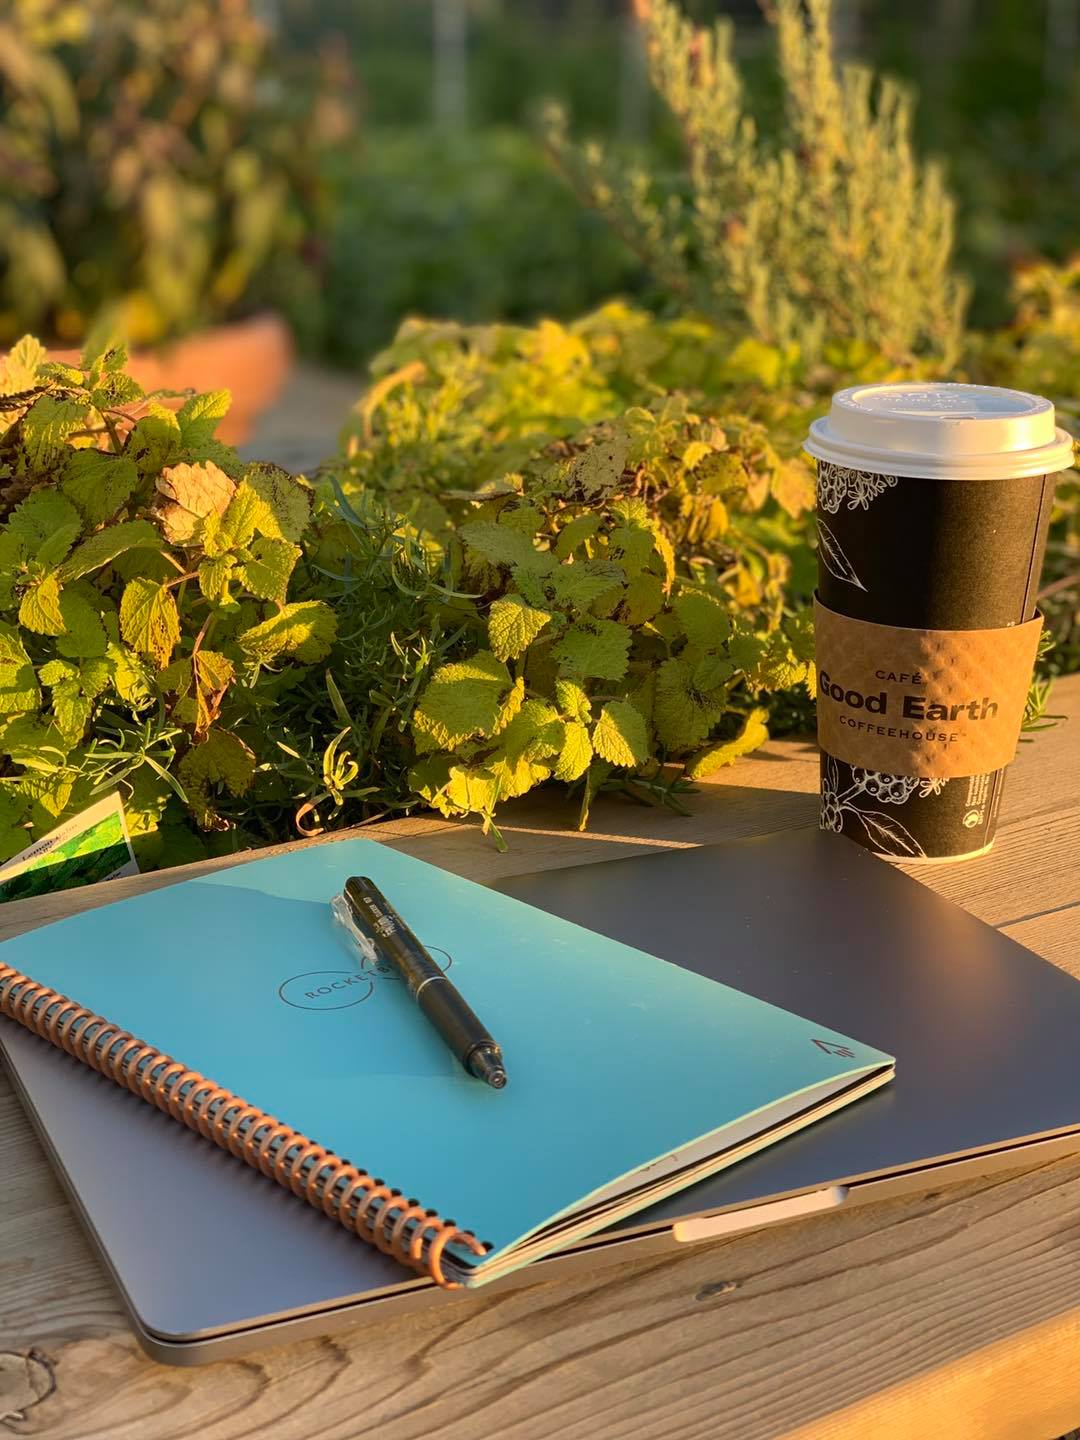 A laptop with a notebook and pen sit atop a picnic table. On the right is a coffee cup. There is greenery in the background.